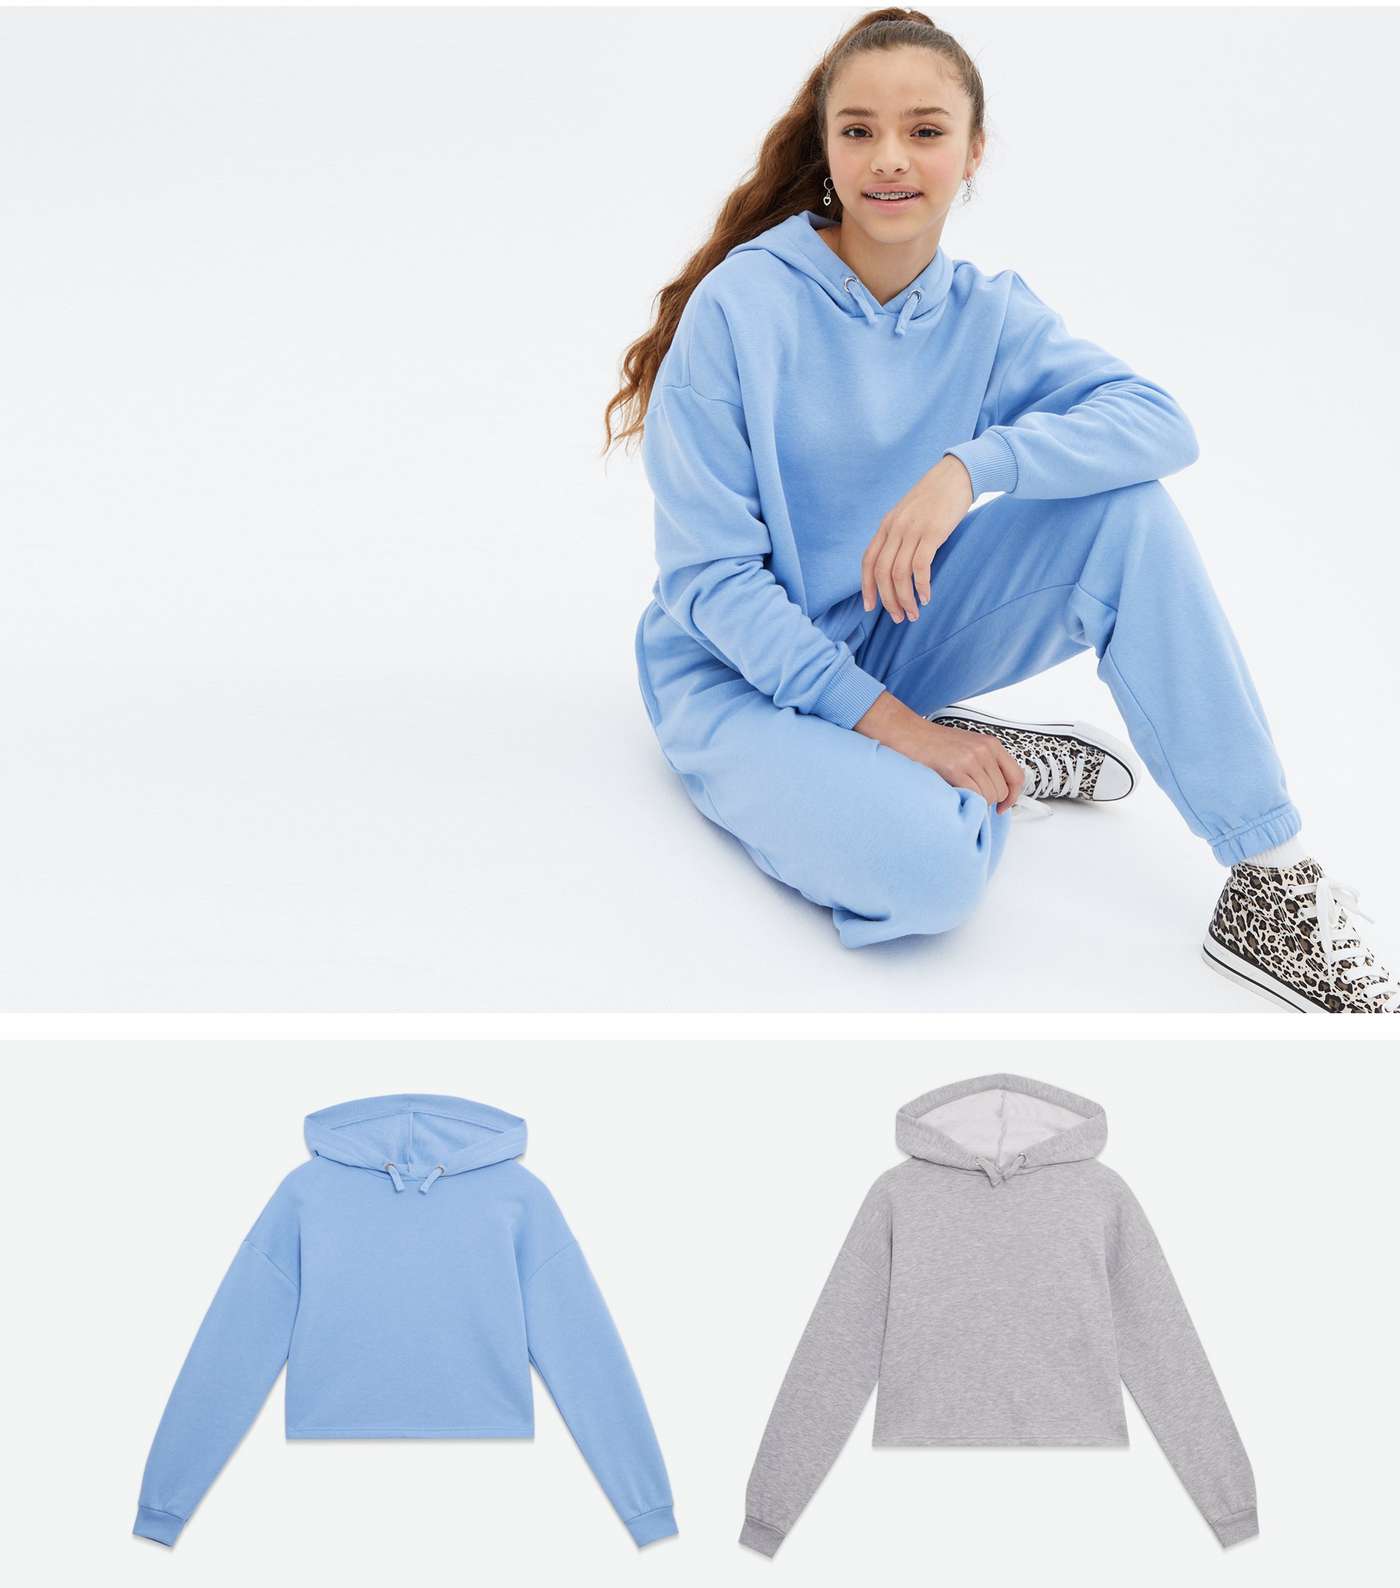 Girls 2 Pack Pale Blue and Grey Plain Hoodies